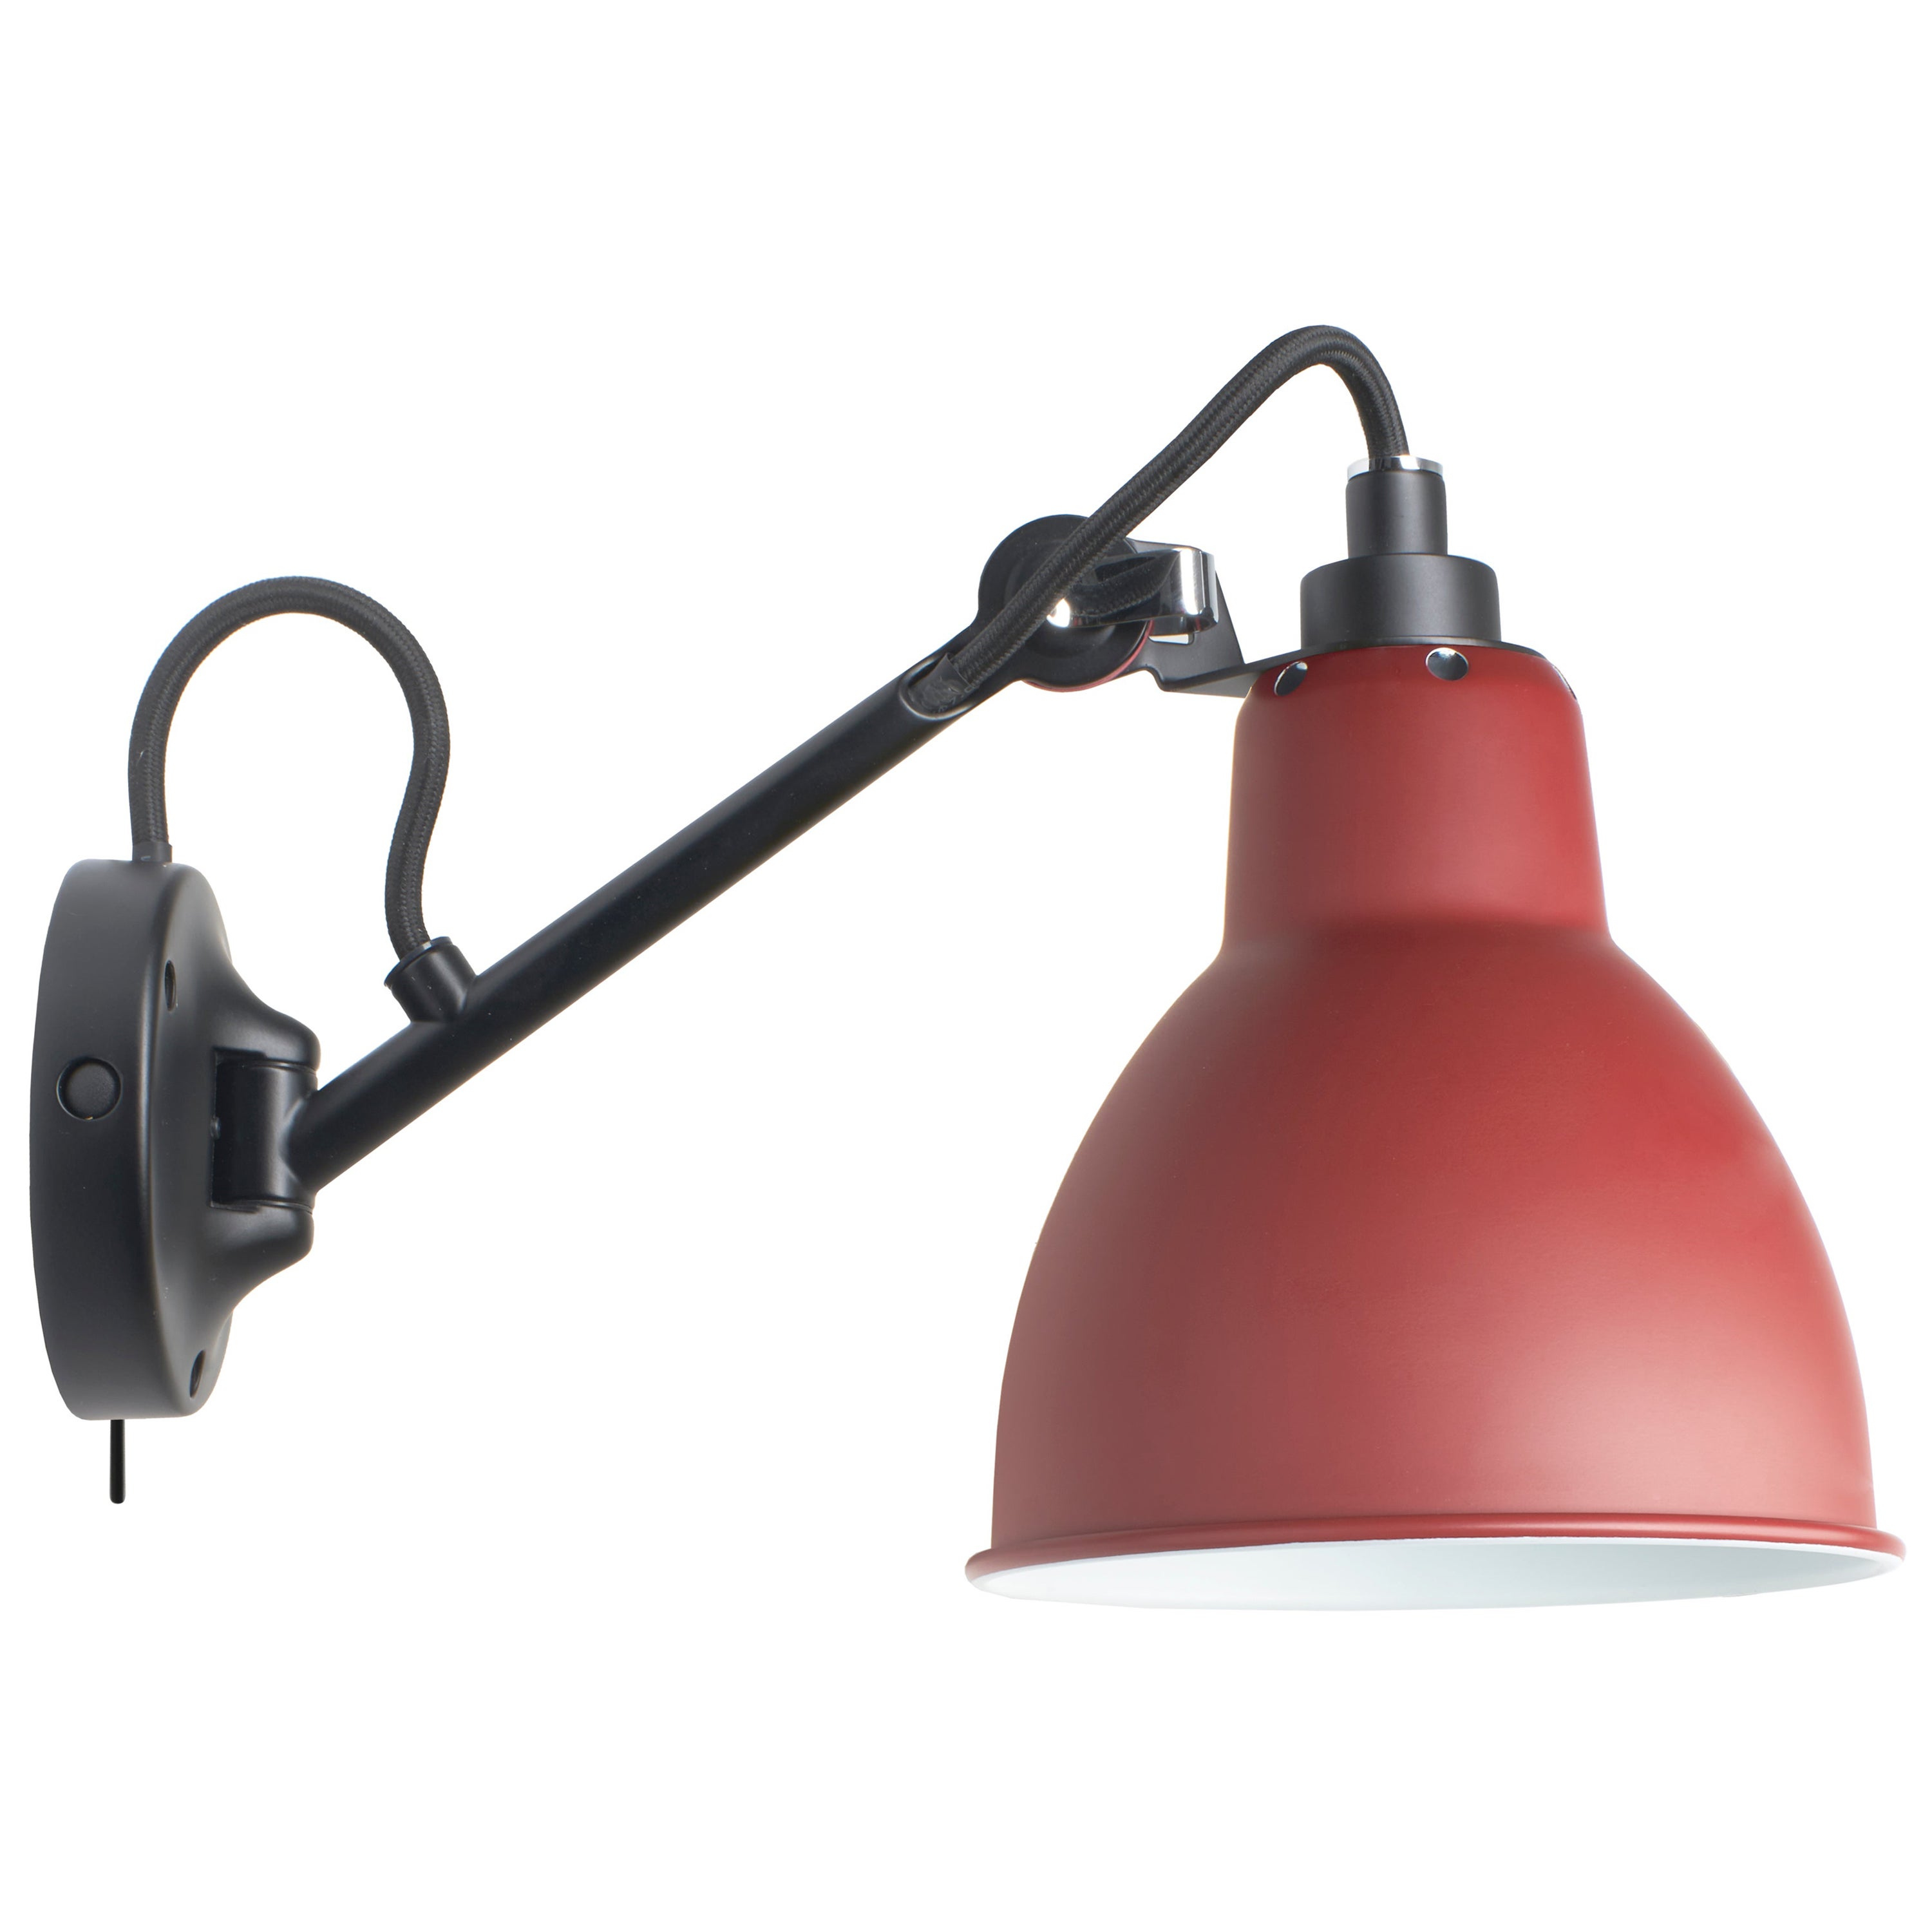 DCW Editions La Lampe Gras N°104 SW Wall Lamp in Black Arm and Red Shade